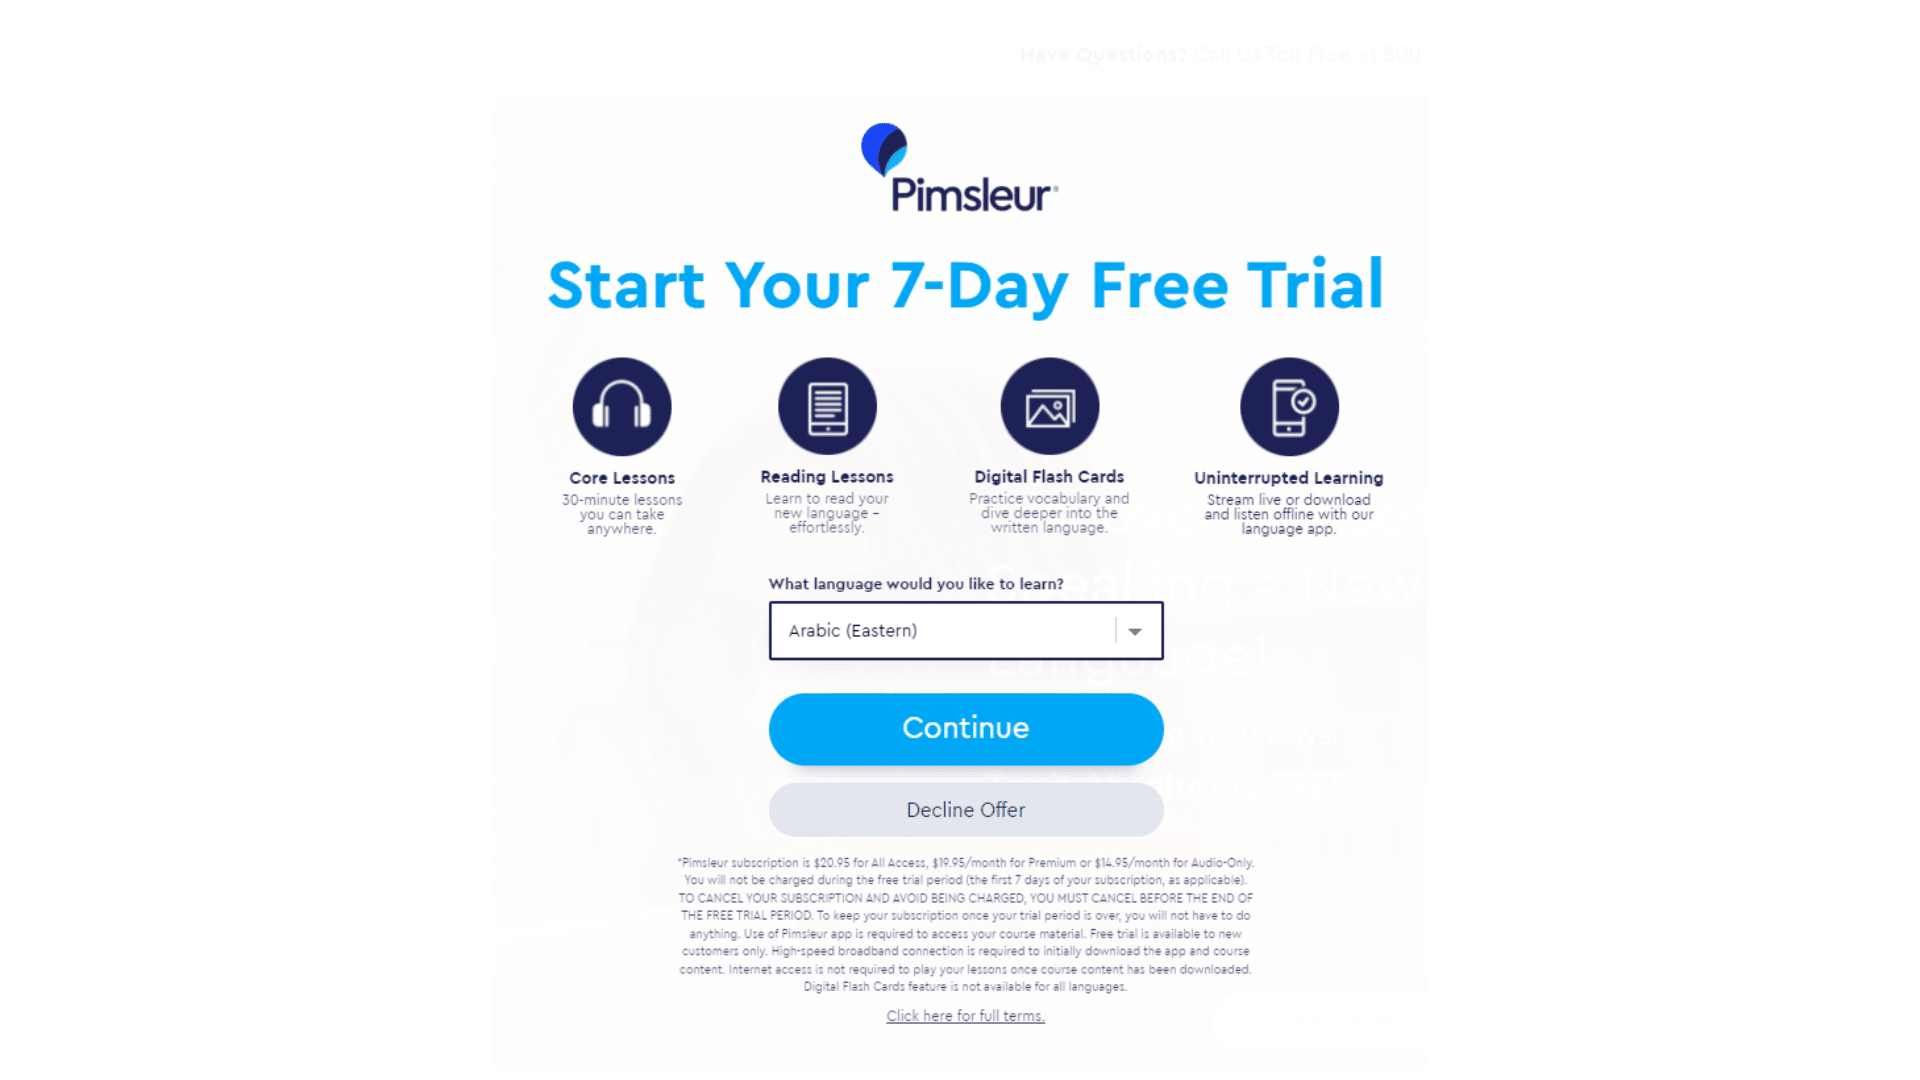 Pimsleur Pricing